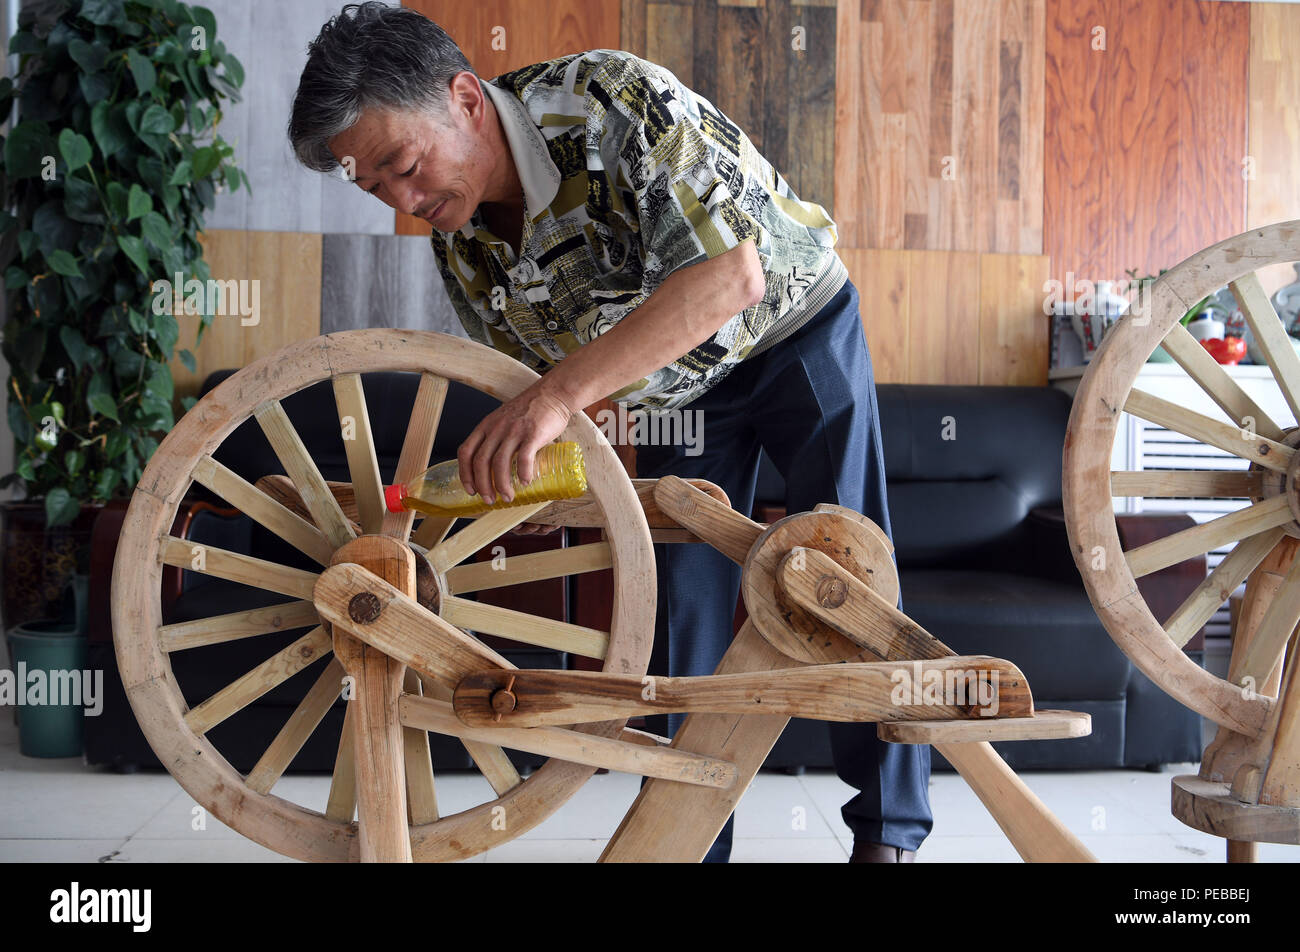 Pingliang, China's Gansu Province. 14th Aug, 2018. He Yong lubricates the bearing of a wooden bicycle in Liuhu Township of Pingliang City, northwest China's Gansu Province, Aug. 14, 2018. The 55-year-old farmer He Yong successfully made a 1.8-meter-long and 0.98-meter-high wooden bicycle in 2017. The bike was made purely of wood, including walnut and elm. Credit: Fan Peishen/Xinhua/Alamy Live News Stock Photo